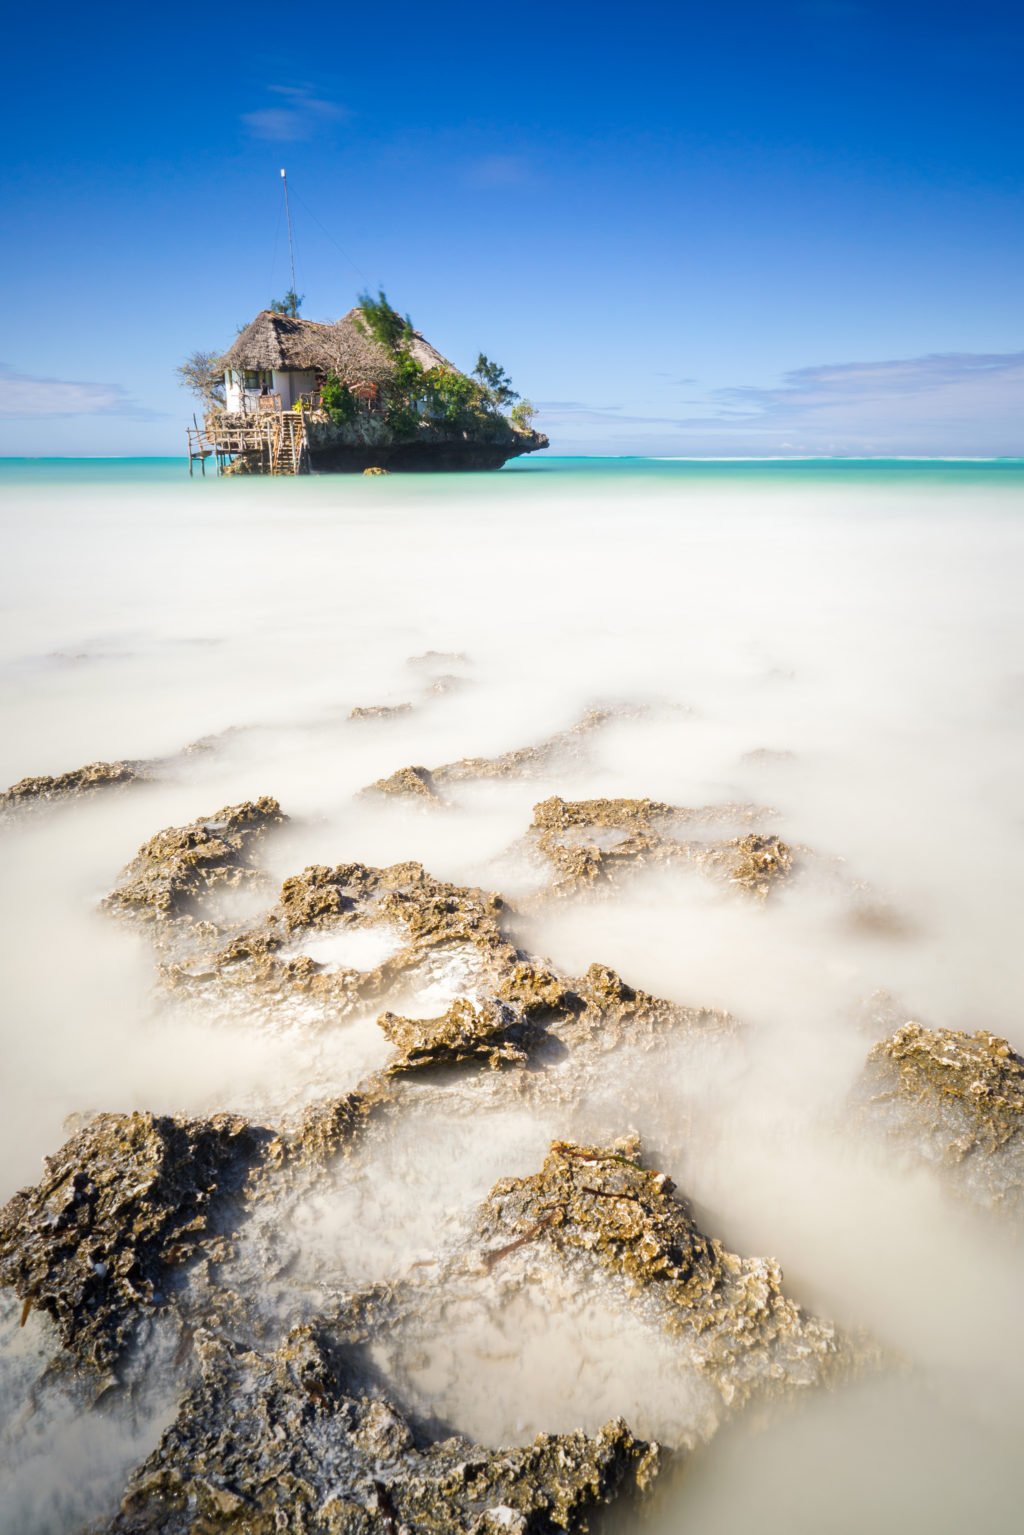 The Rock. One of the most iconic views of Zanzibar. It is a restaurant that was built on a rock not too far from the shore of Pingwe on the east coast. Although you can get to the rock on foot at low tide, you’ll need a boat if you want to reach your table at high tide!